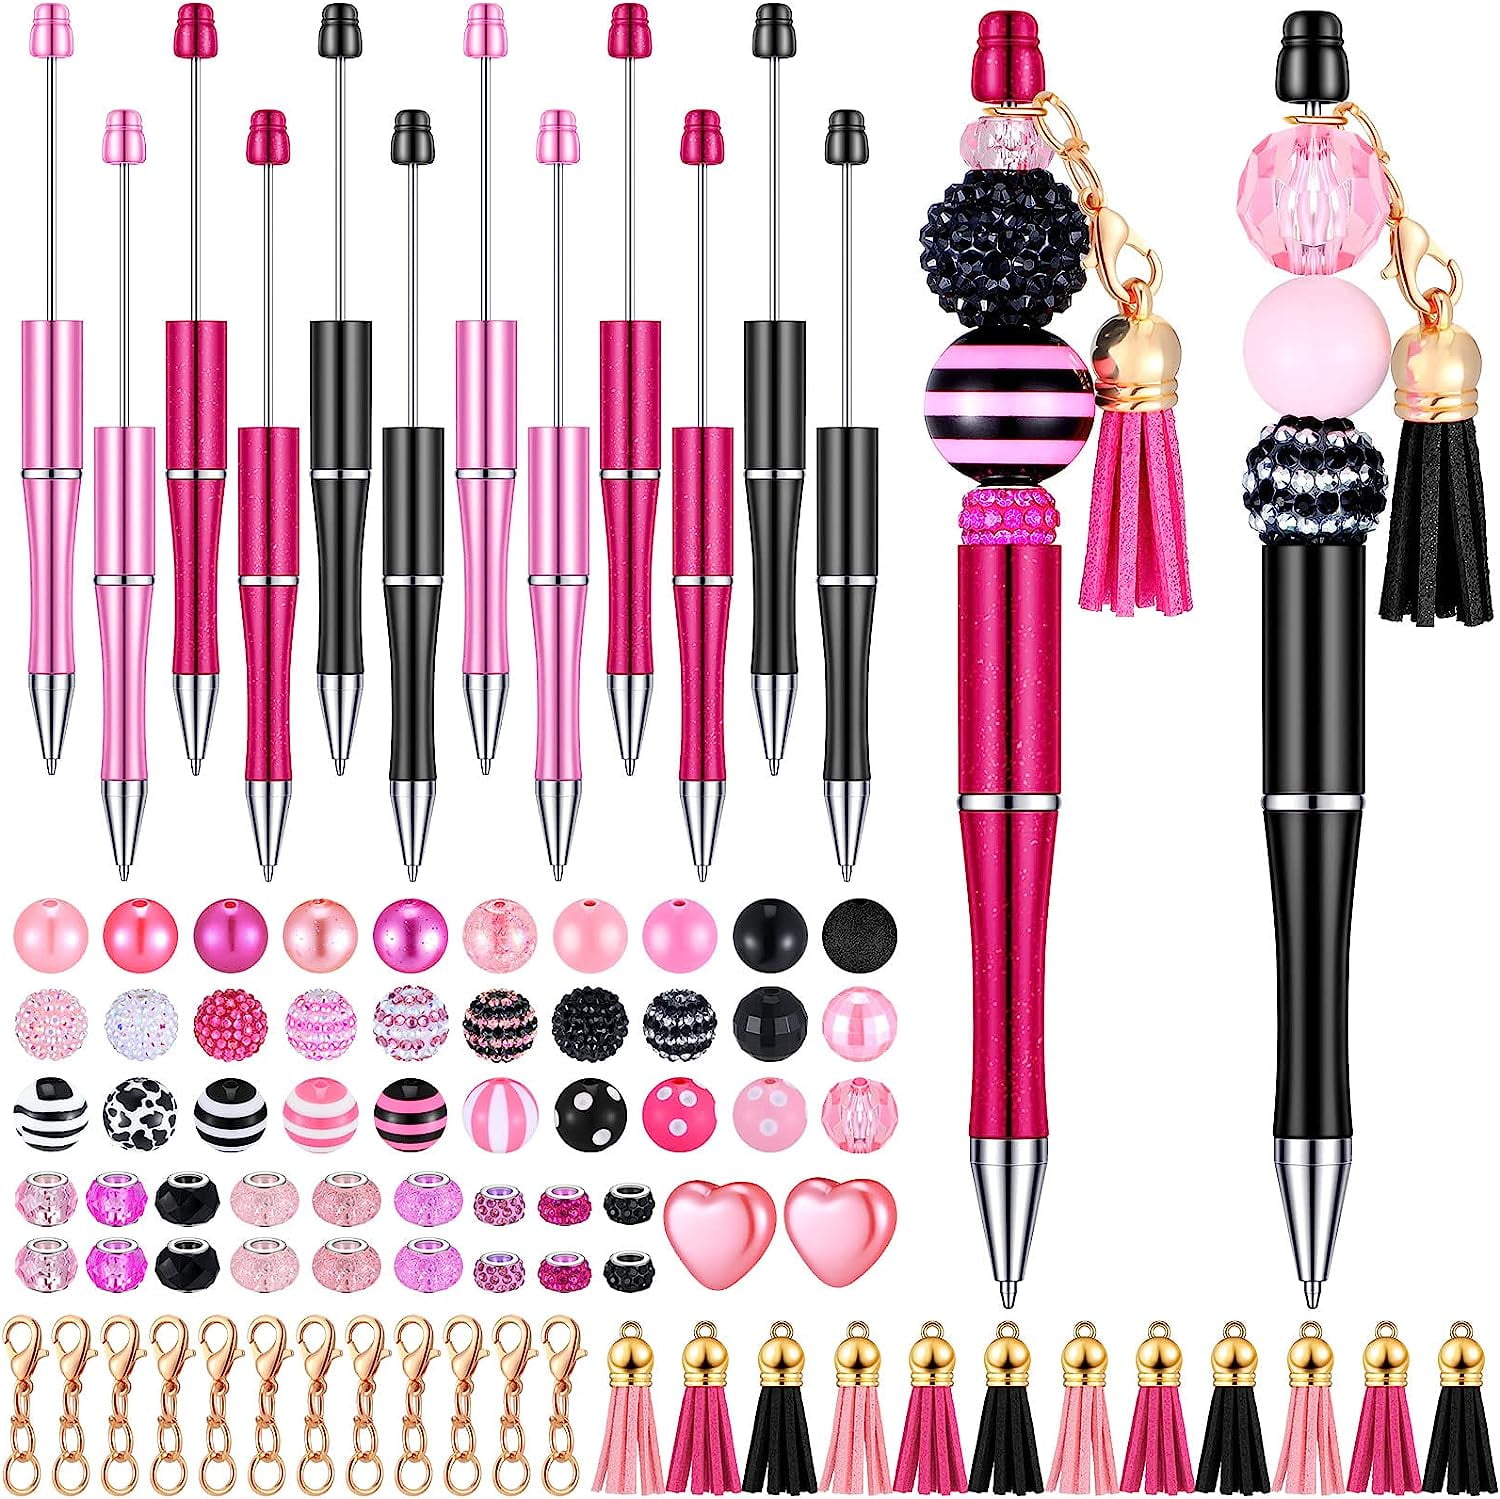 13 Pieces Metal Beadable Pens For Diy Ppl Beads Pens Ballpoint Pen Ball Pen  With Shaft Black Ink Rollerball Pen For Kids Students Presents Office  Classroom School Supplies 